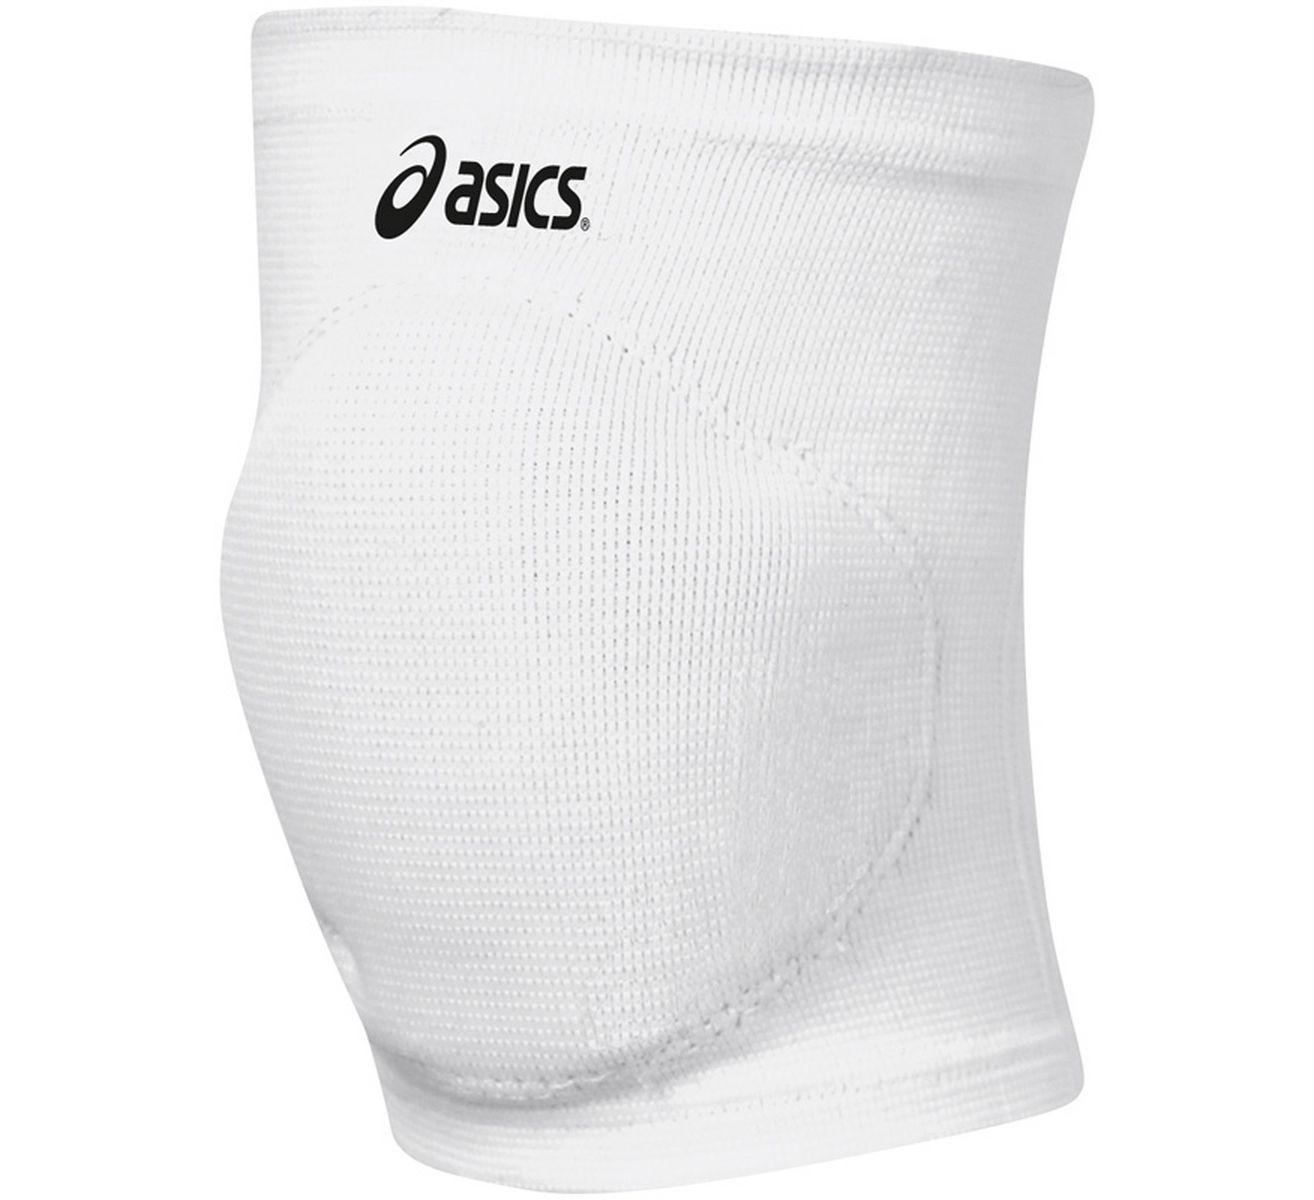 ASICS Competition 3.0G Volleyball Knee Pads